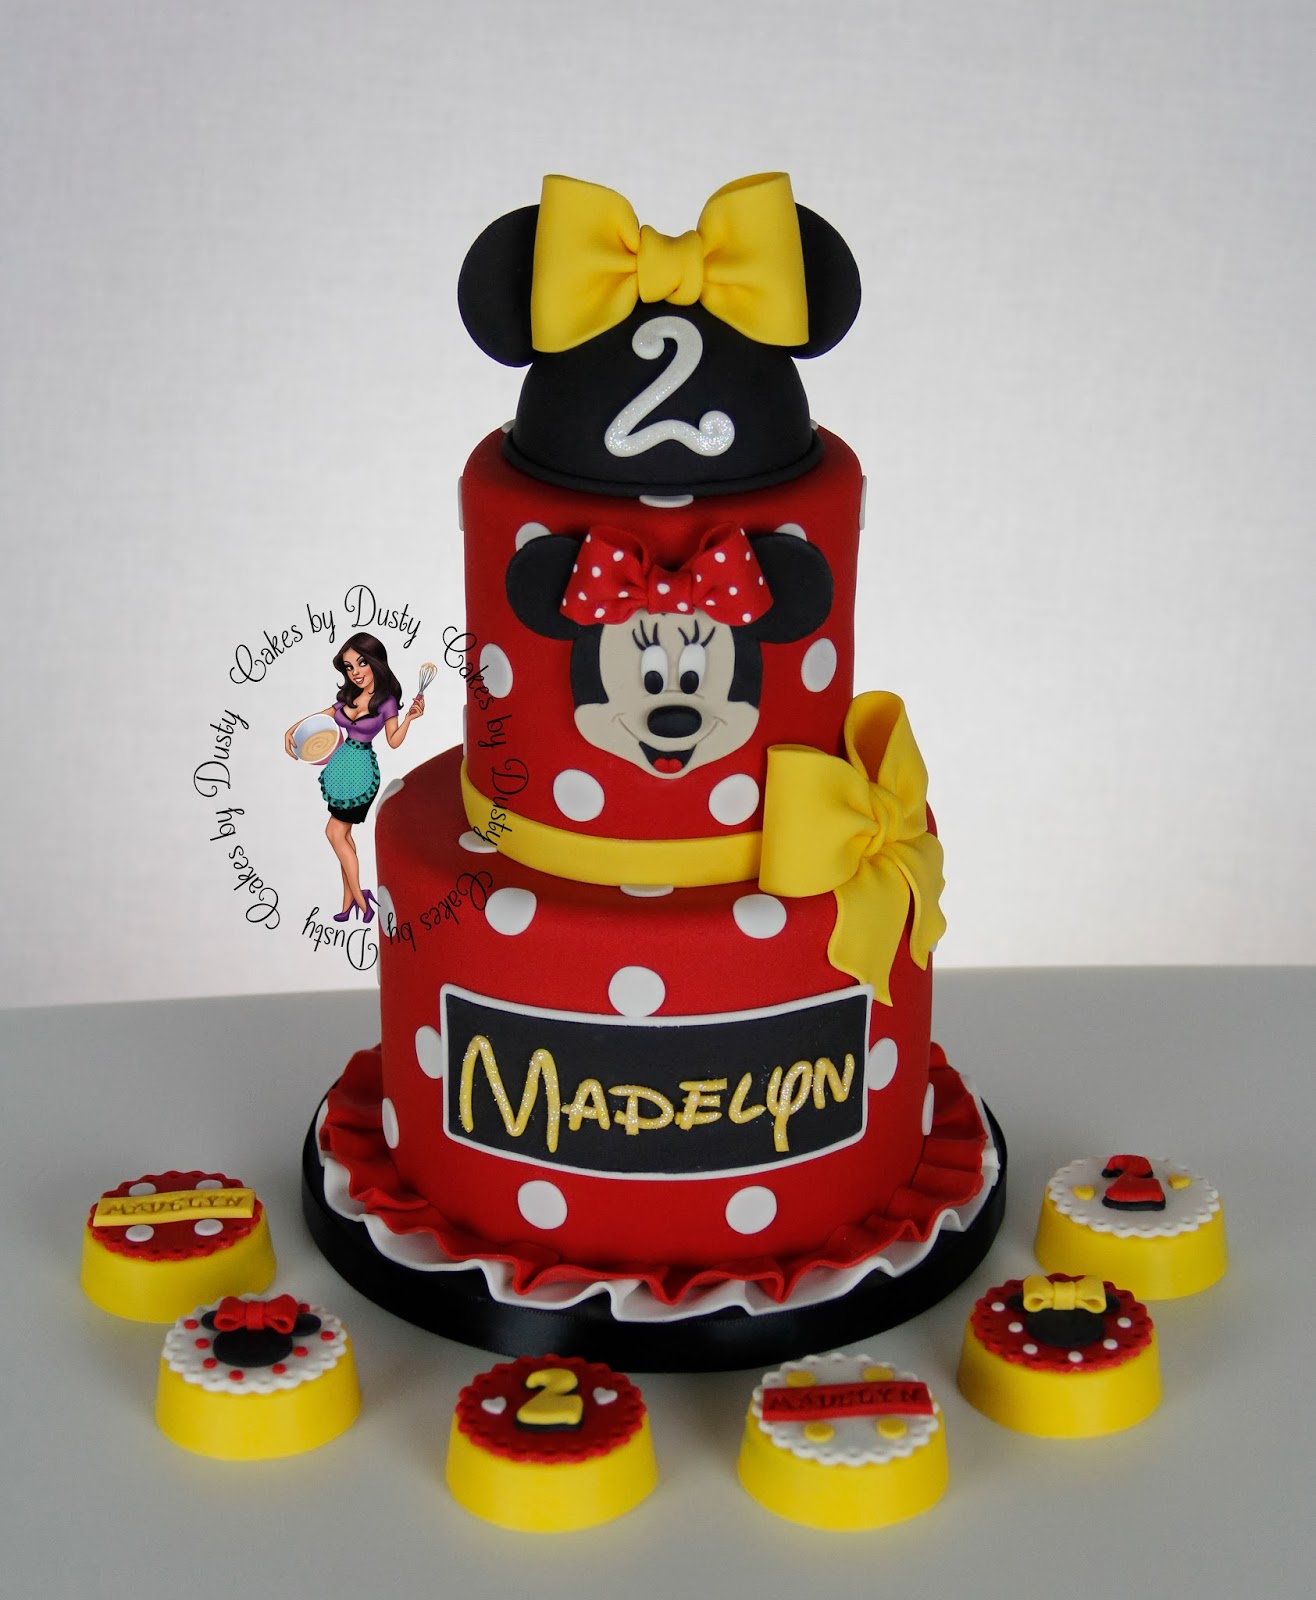 Cakes by Dusty: Madelyn Turns 21316 x 1600